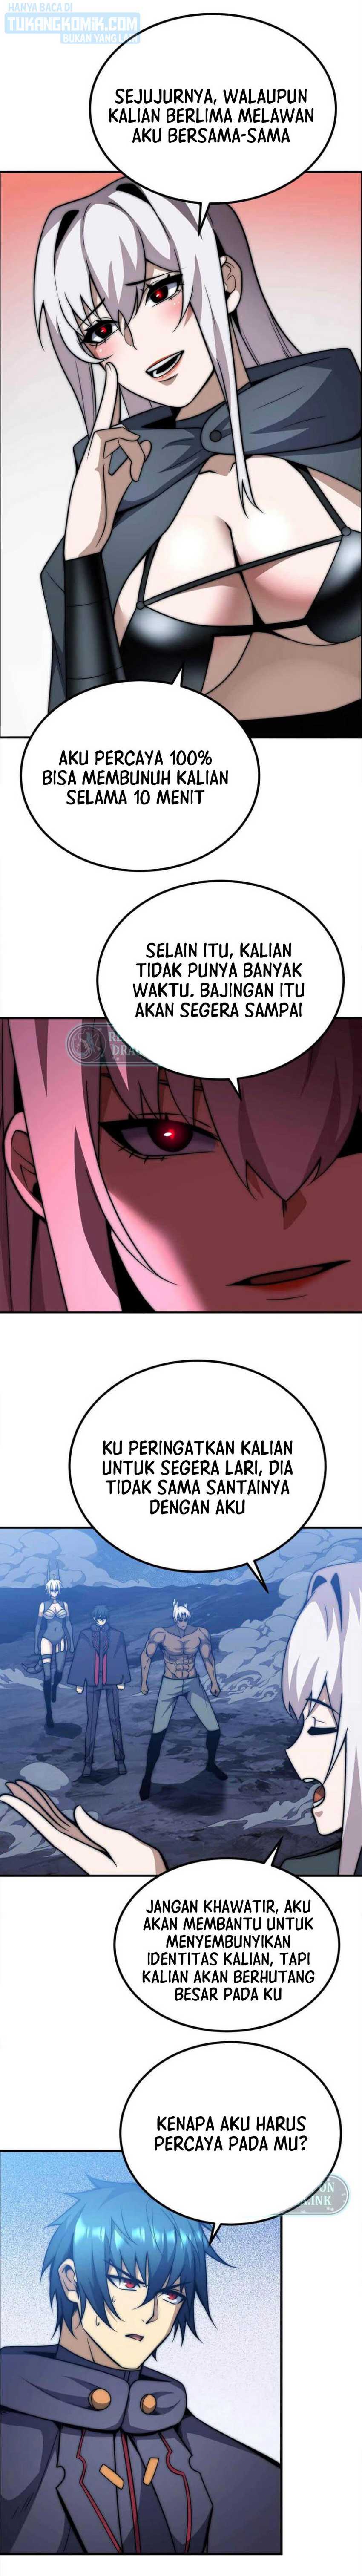 Demon King Cheat System Chapter 49